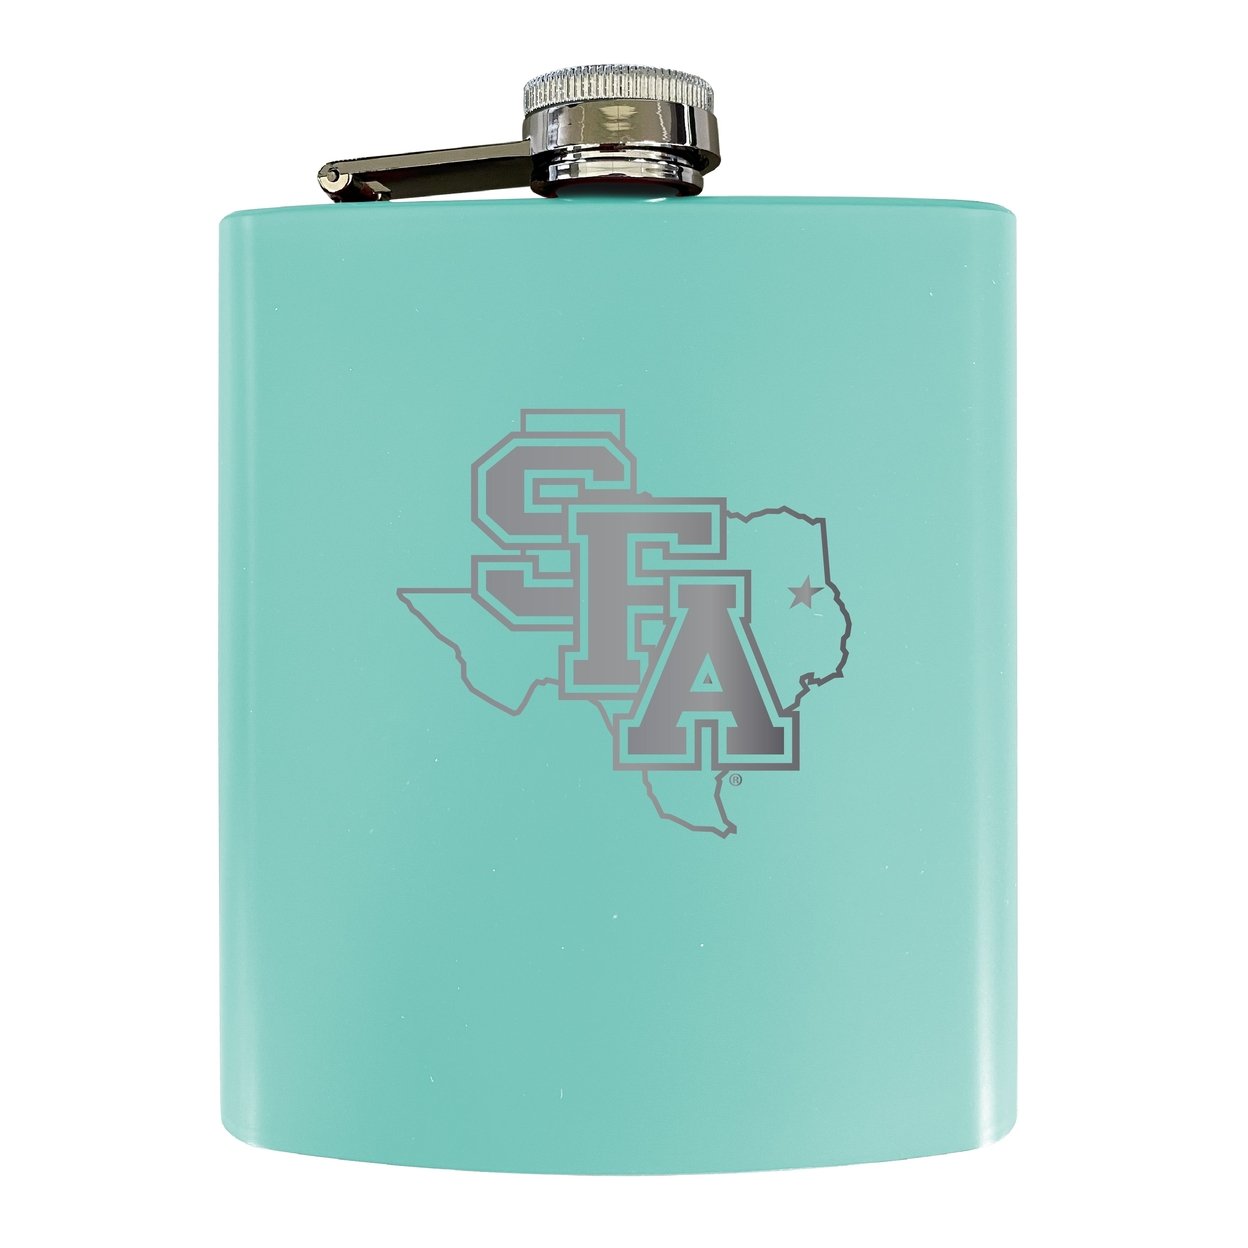 Stephen F. Austin State University Stainless Steel Etched Flask - Choose Your Color - Seafoam